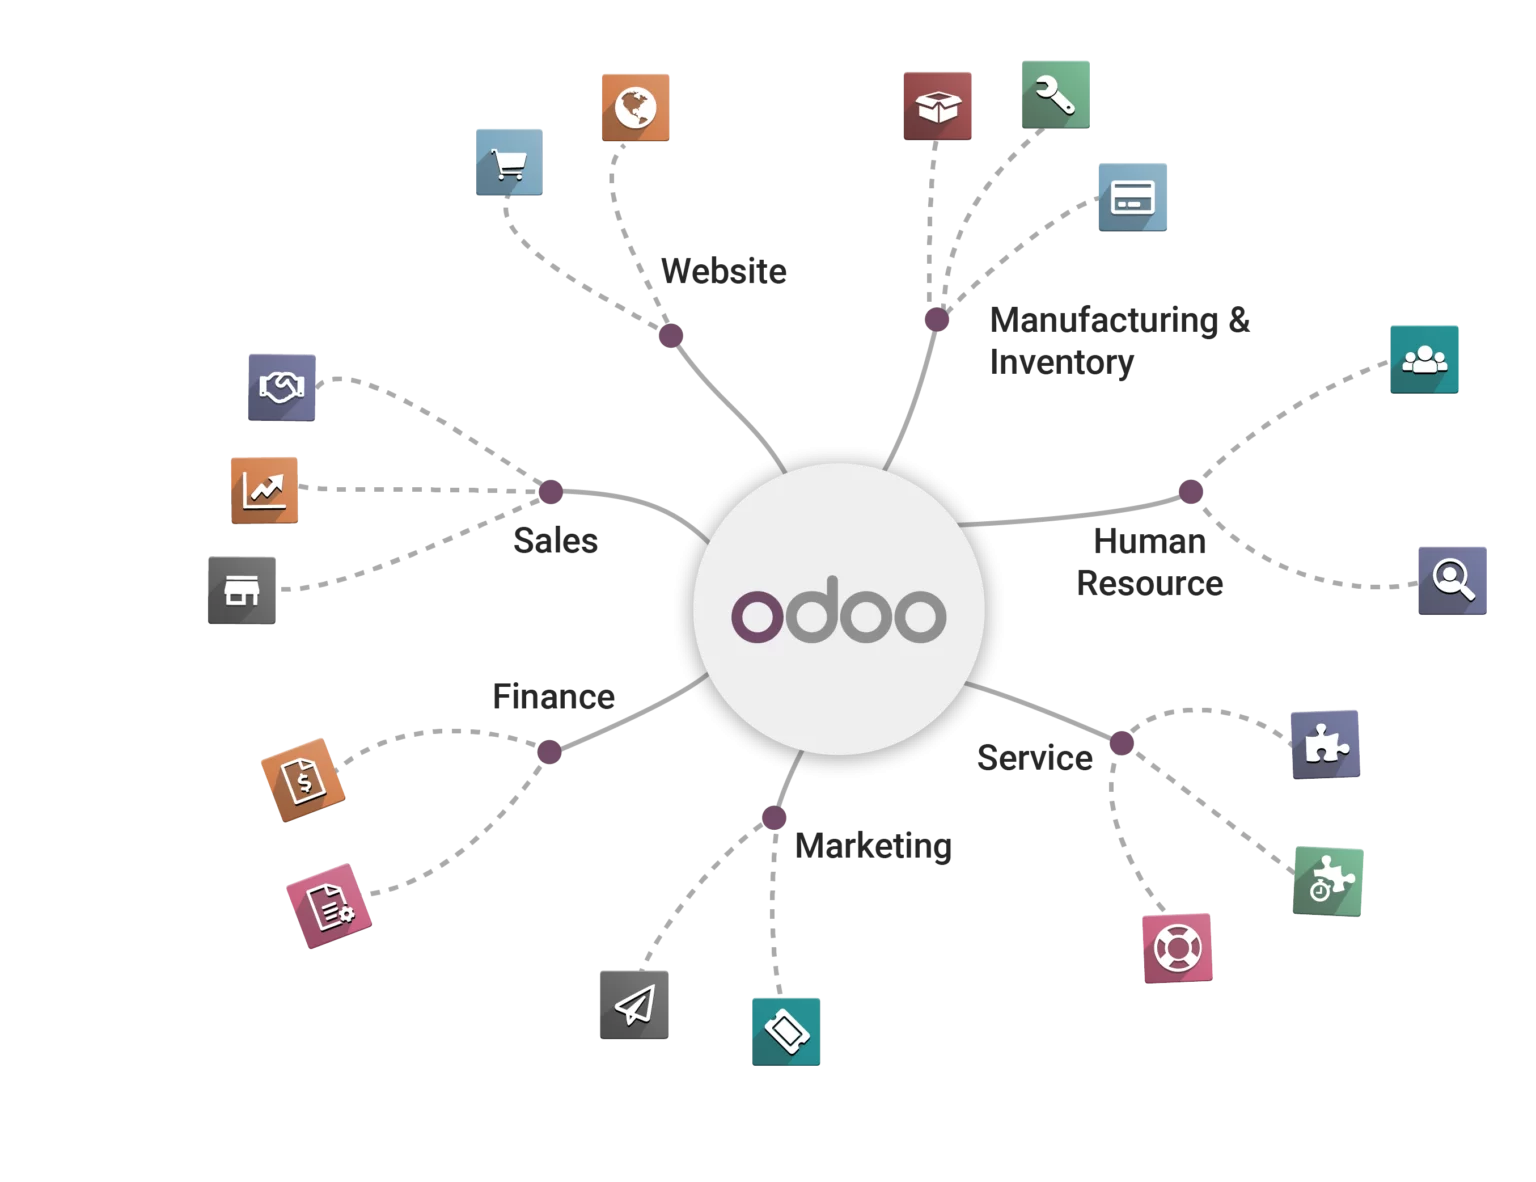 Odoo for different departments